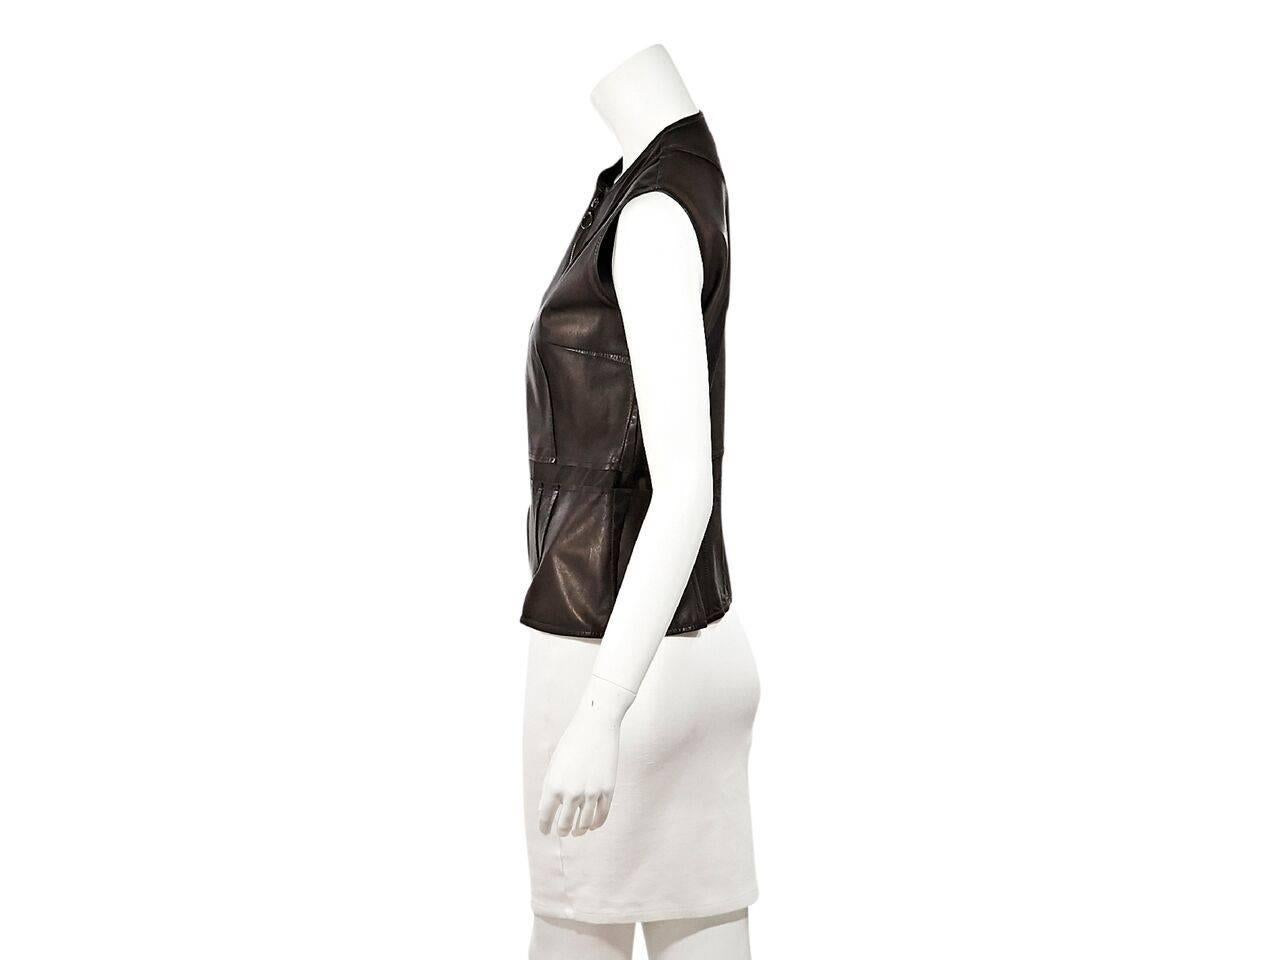 Product details:  Brown leather vest by Lanvin.  Crewneck.  Sleeveless.  Zip-front closure.  Antiqued goldtone hardware.  Label size FR 40.
Condition: Pre-owned. Very good.
Est. Retail $ 998.00